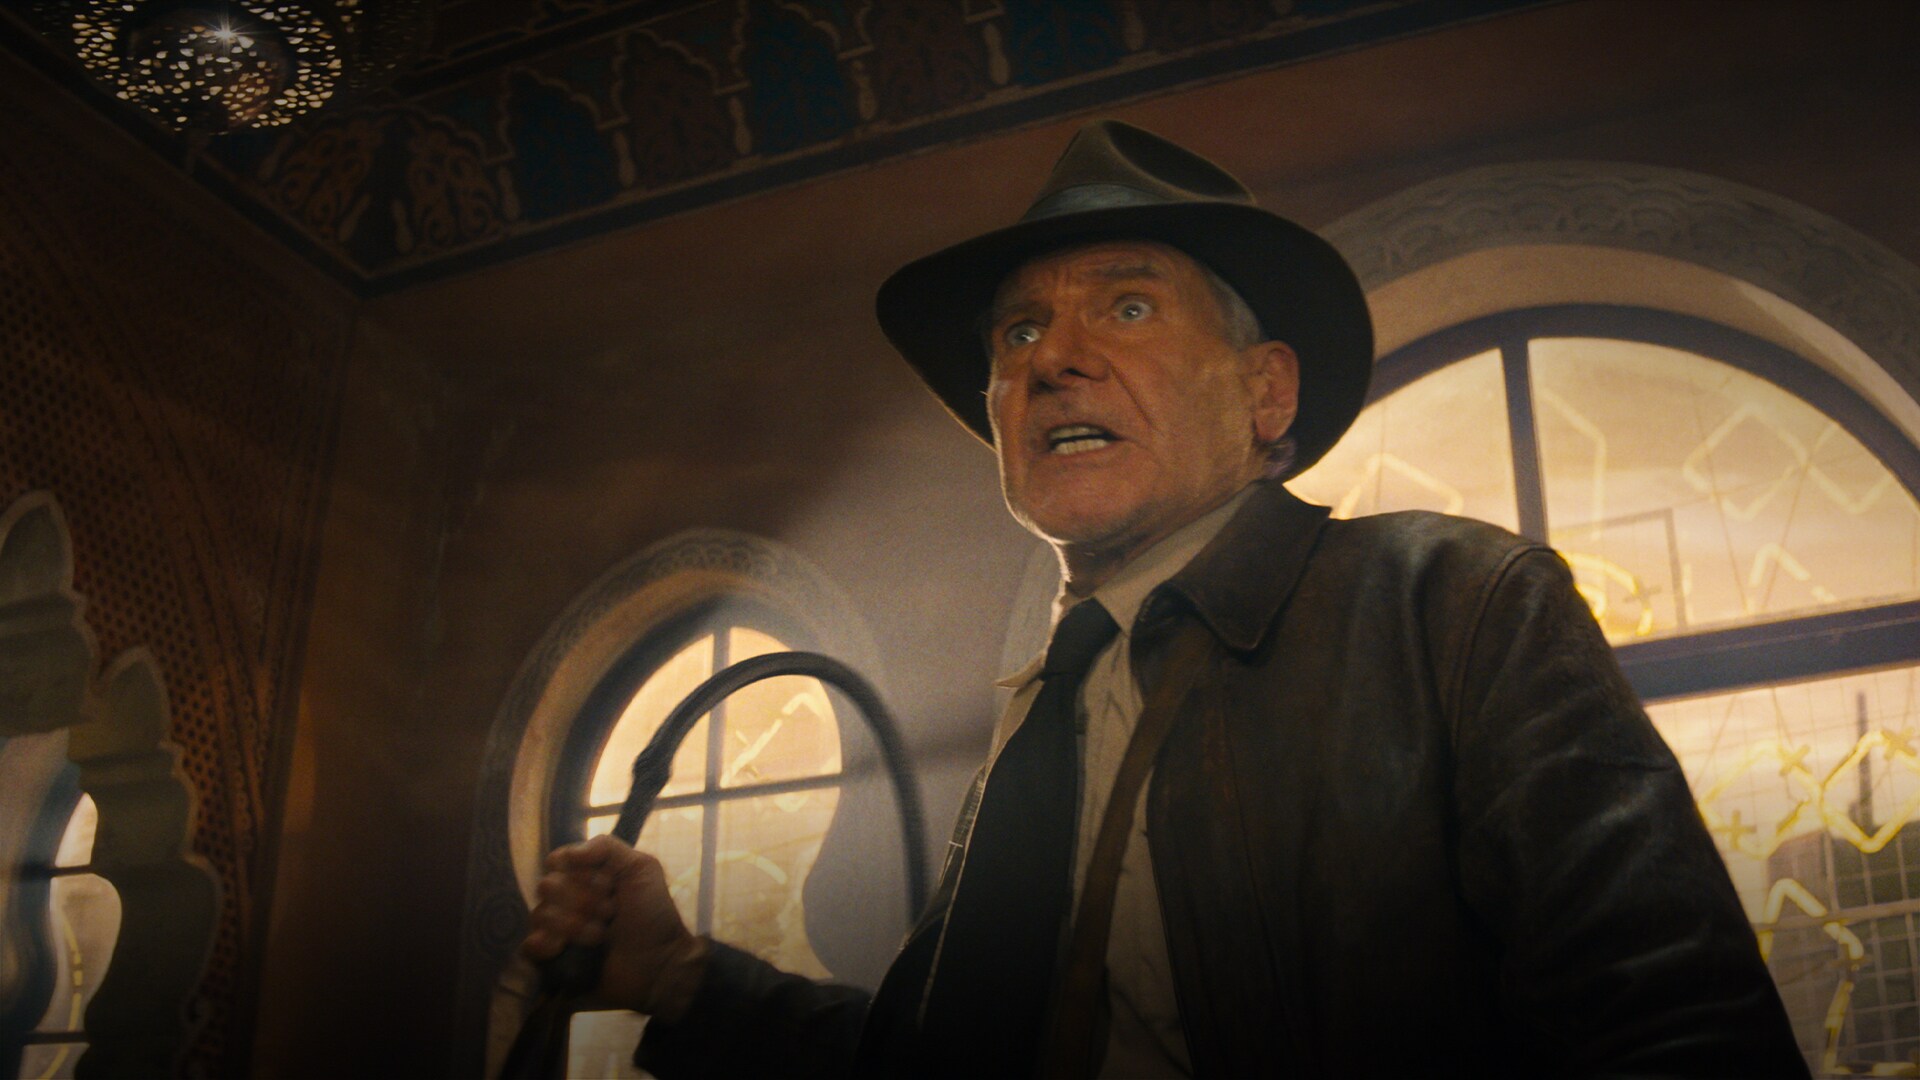 Indiana Jones and the Dial of Destiny-teasertrailer 1